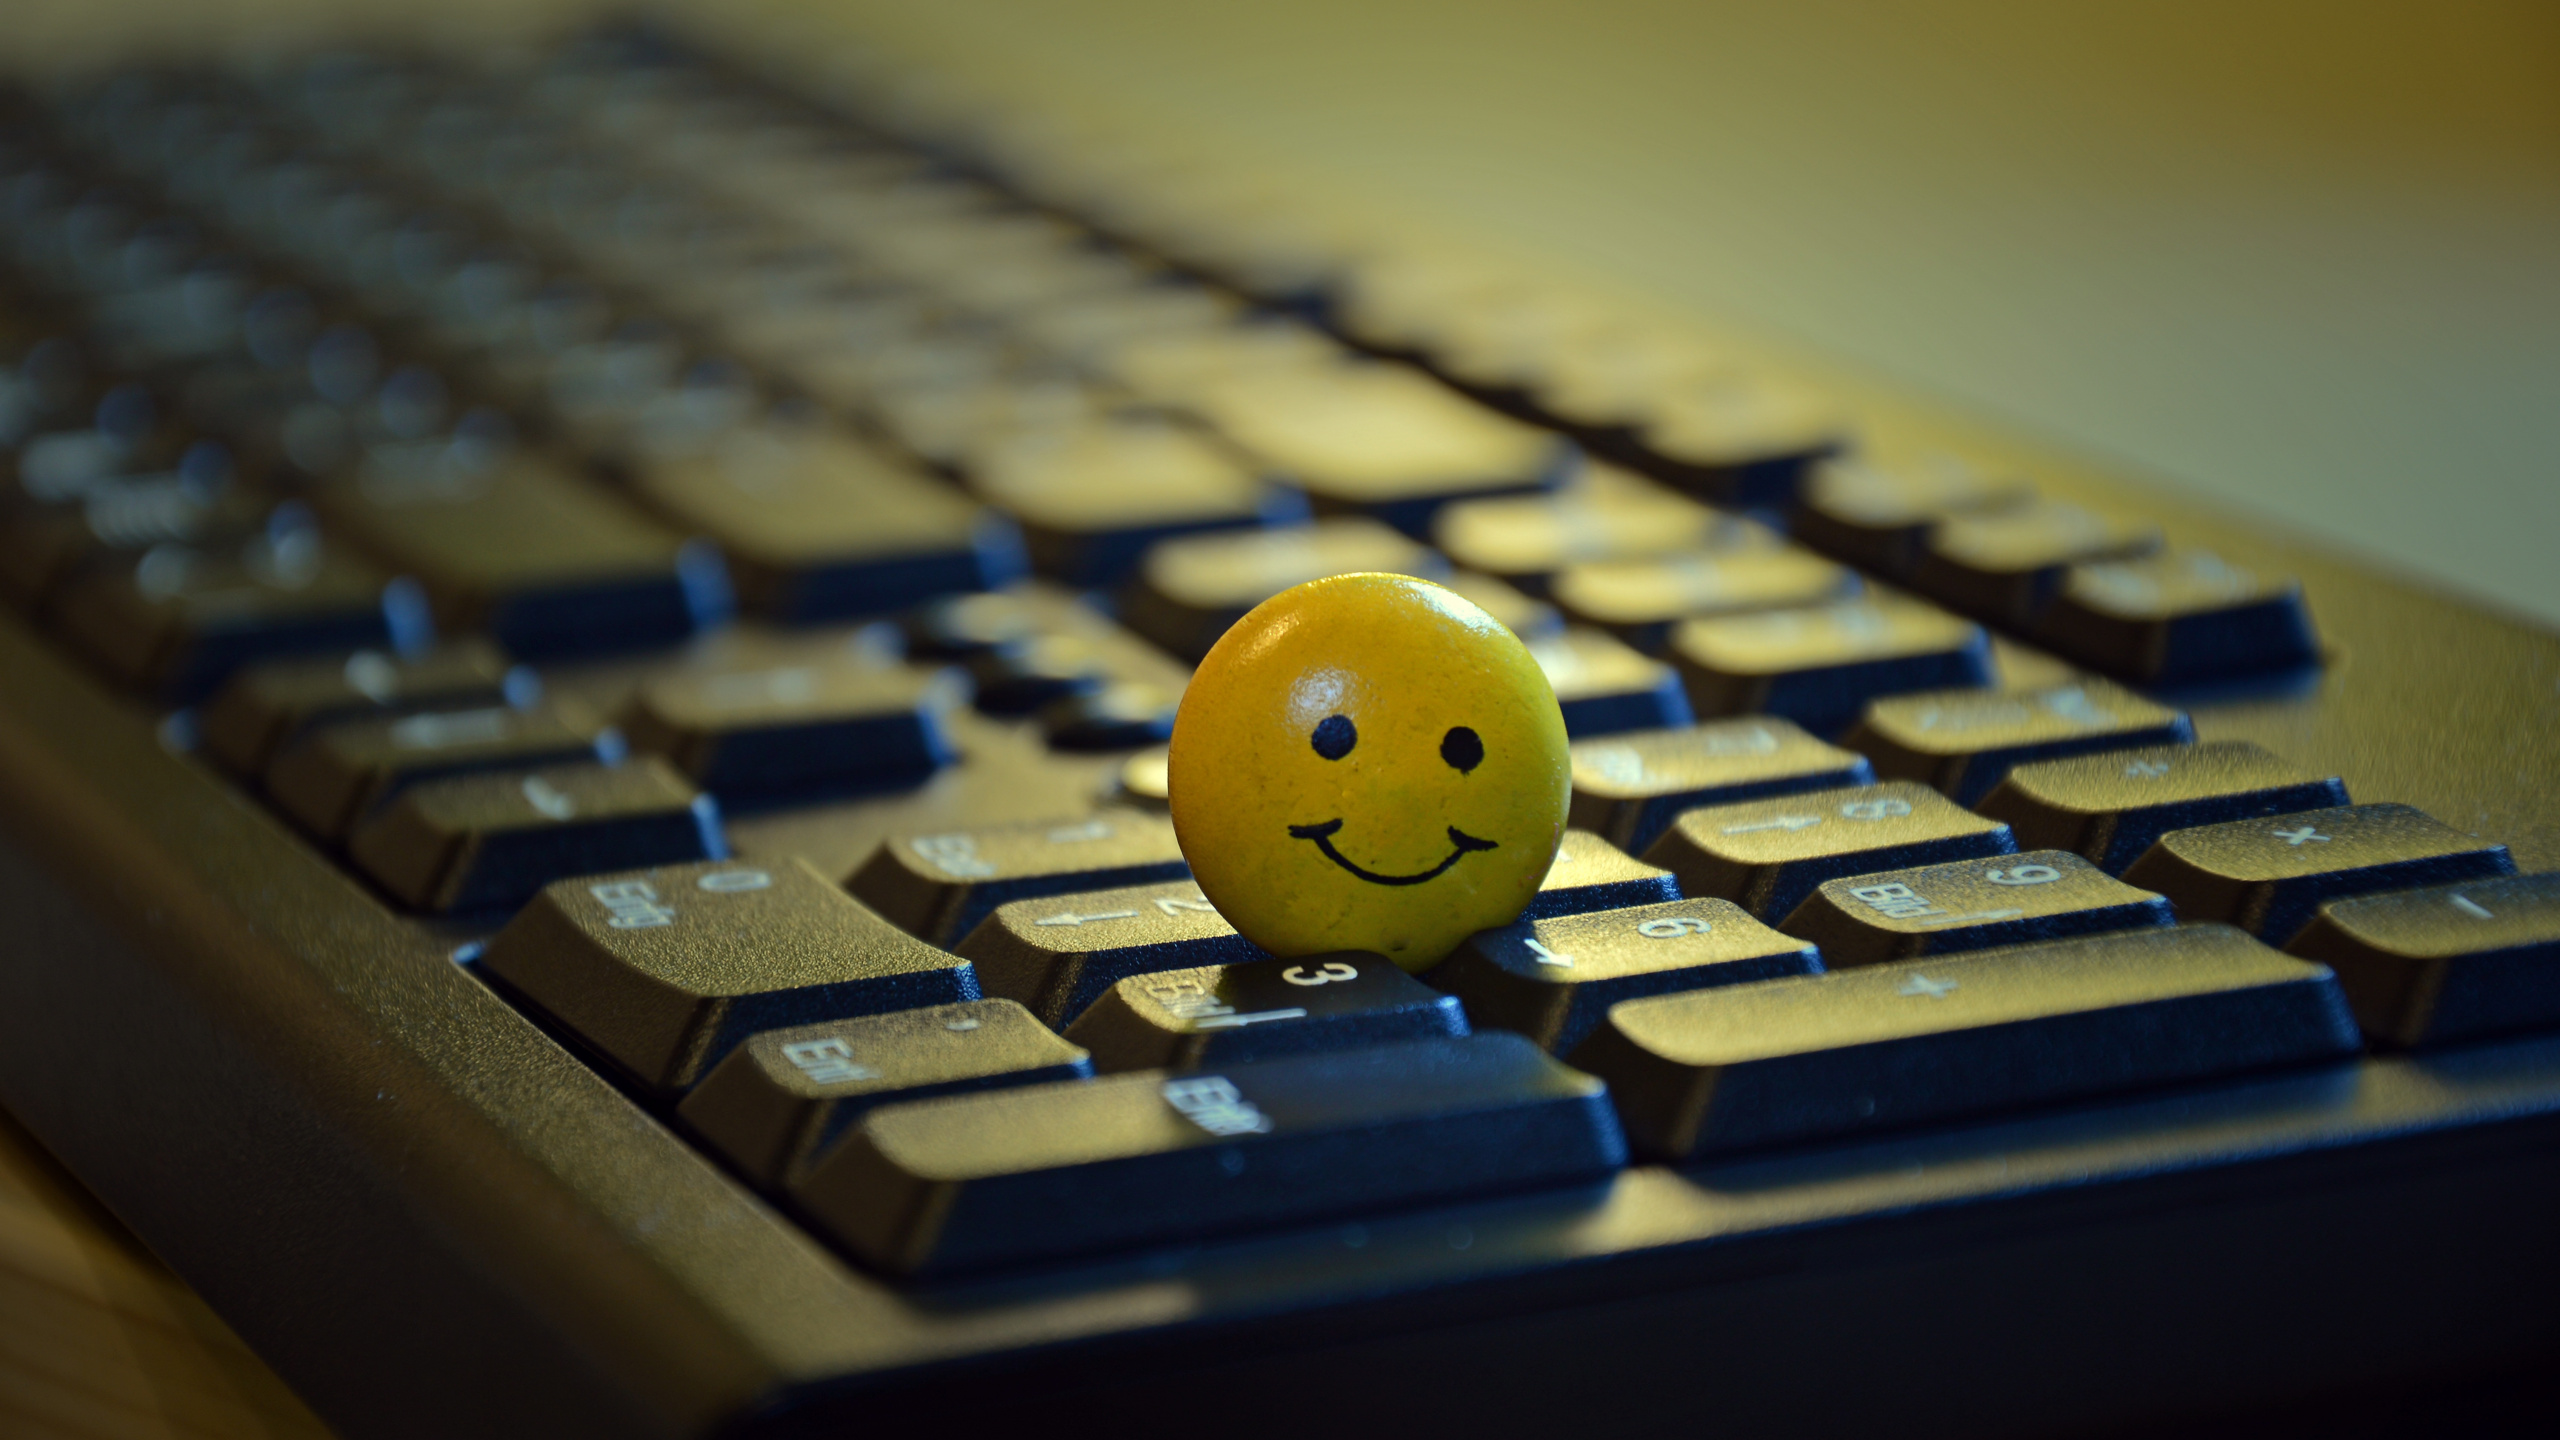 Yellow Smiley Ball on Black Computer Keyboard. Wallpaper in 2560x1440 Resolution